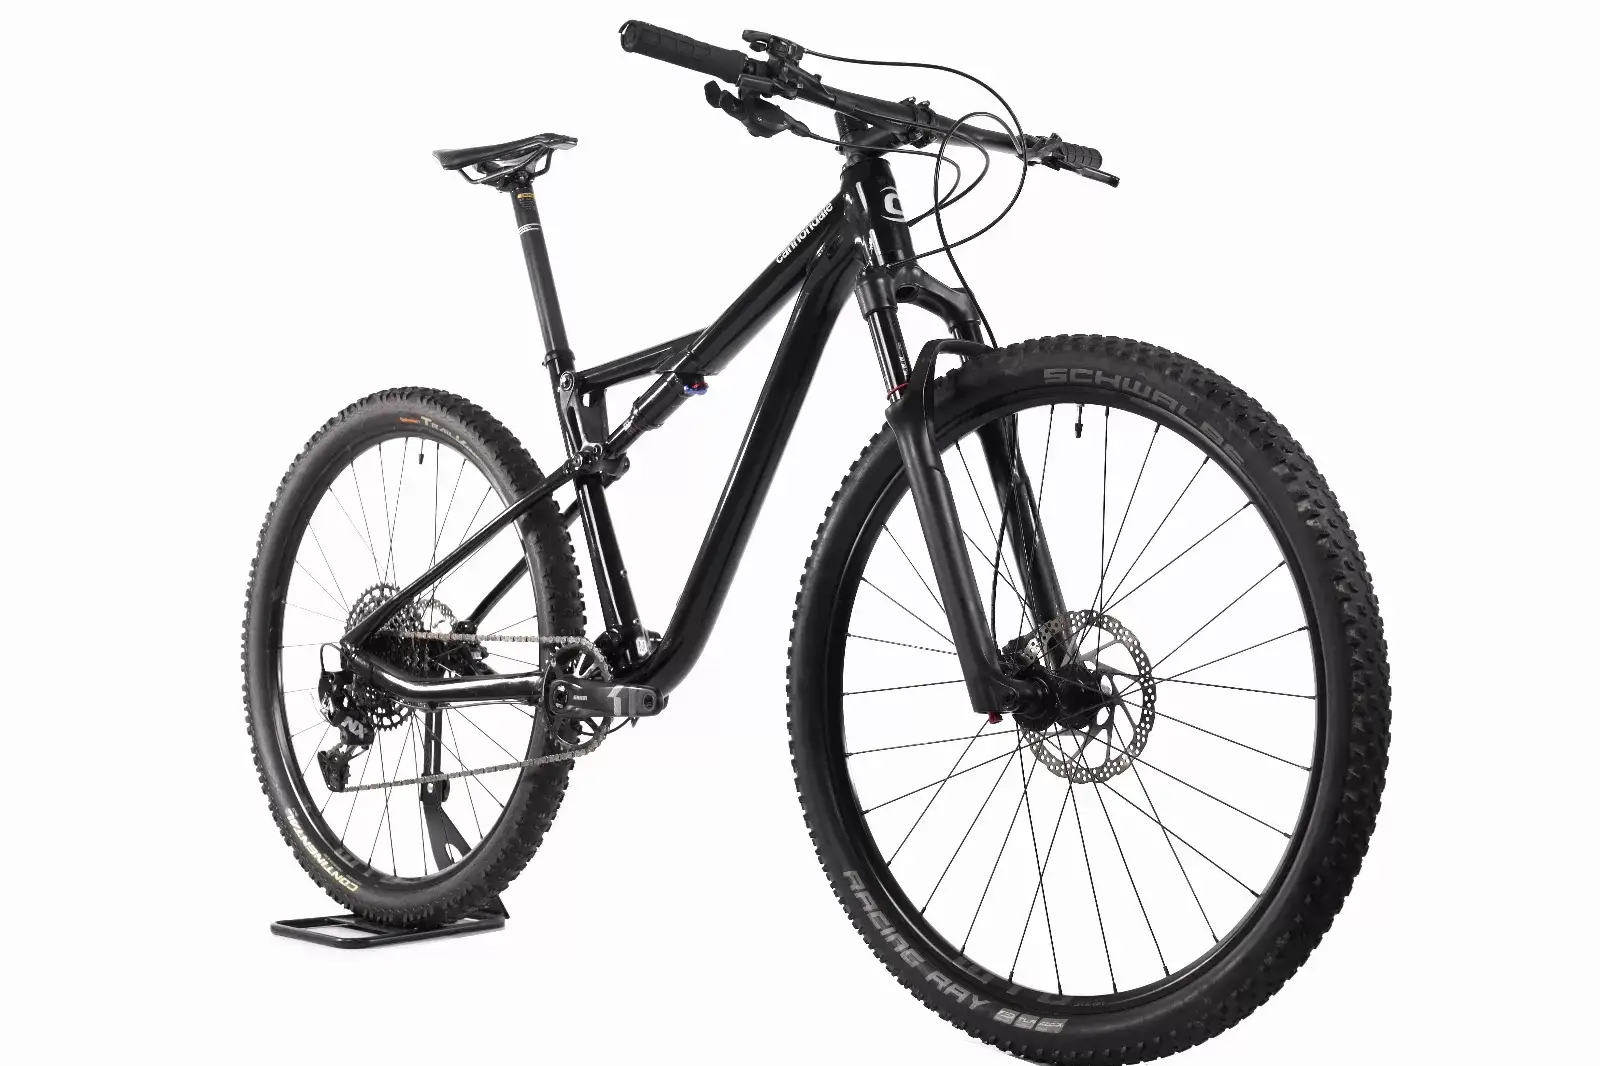 Cannondale Scalpel SI 6 - RockShox used in M | buycycle USA